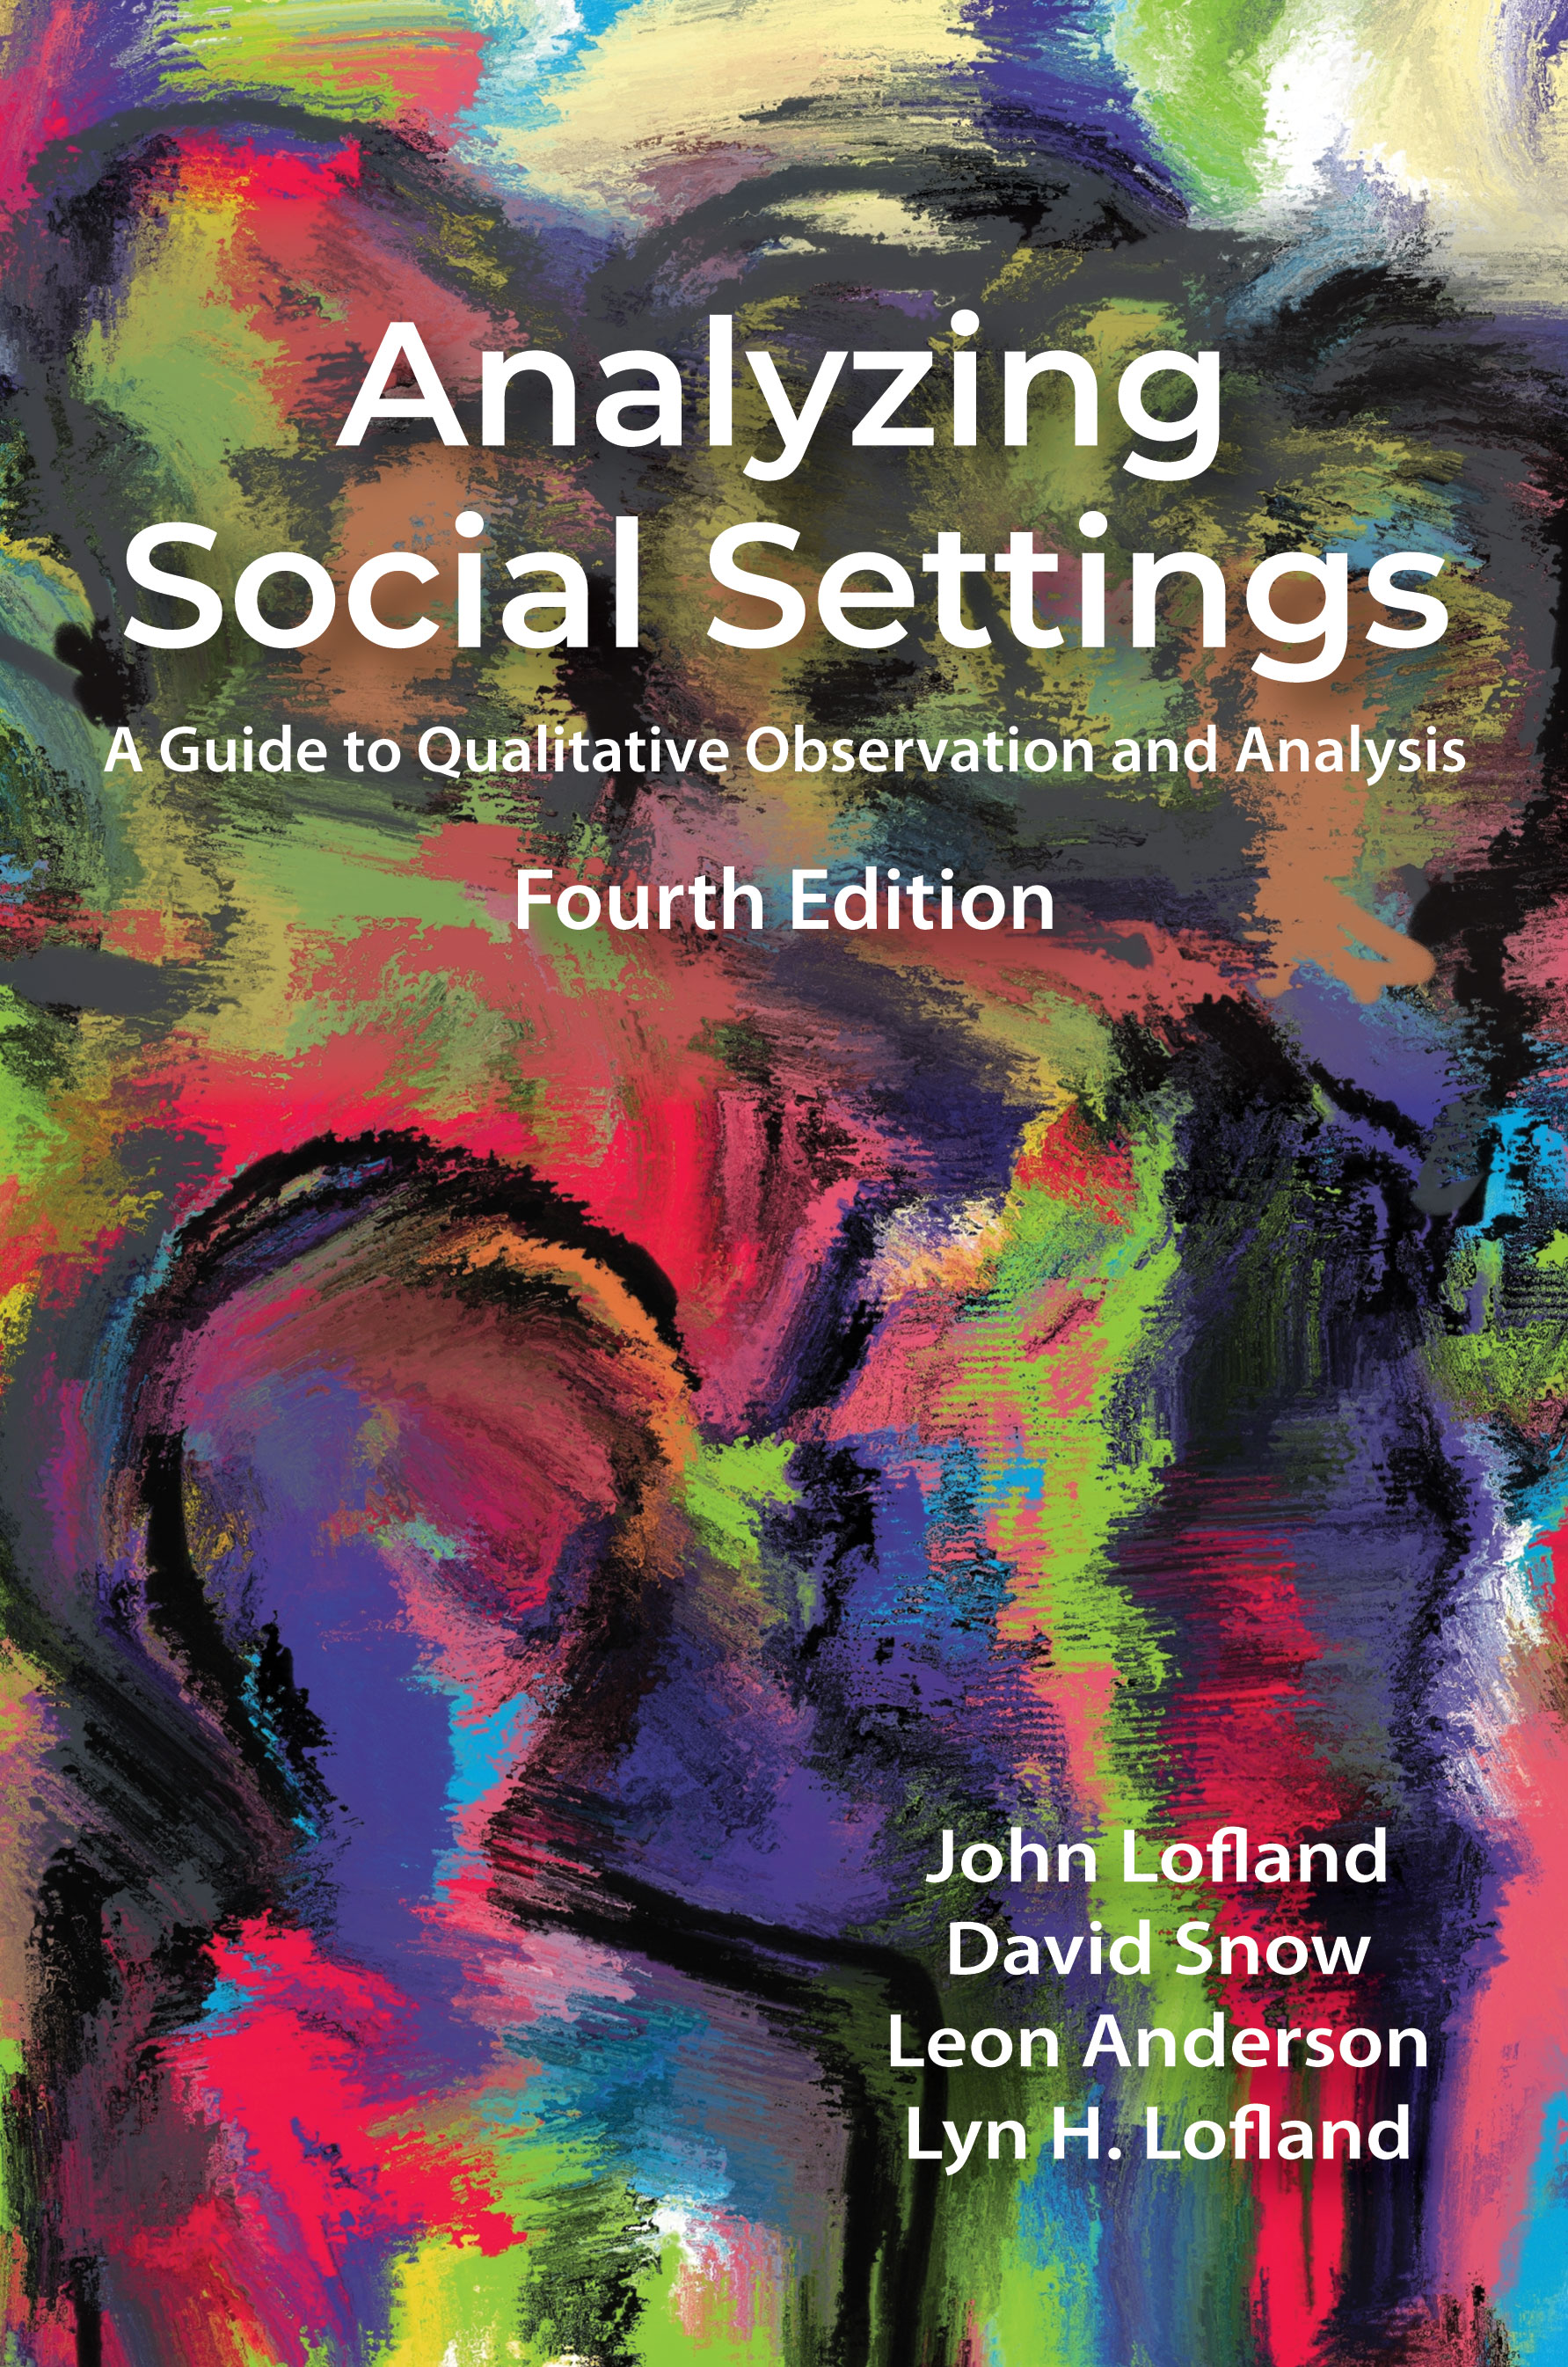 Analyzing Social Settings: A Guide to Qualitative Observation and Analysis by John  Lofland, David  Snow, Leon  Anderson, Lyn H. Lofland